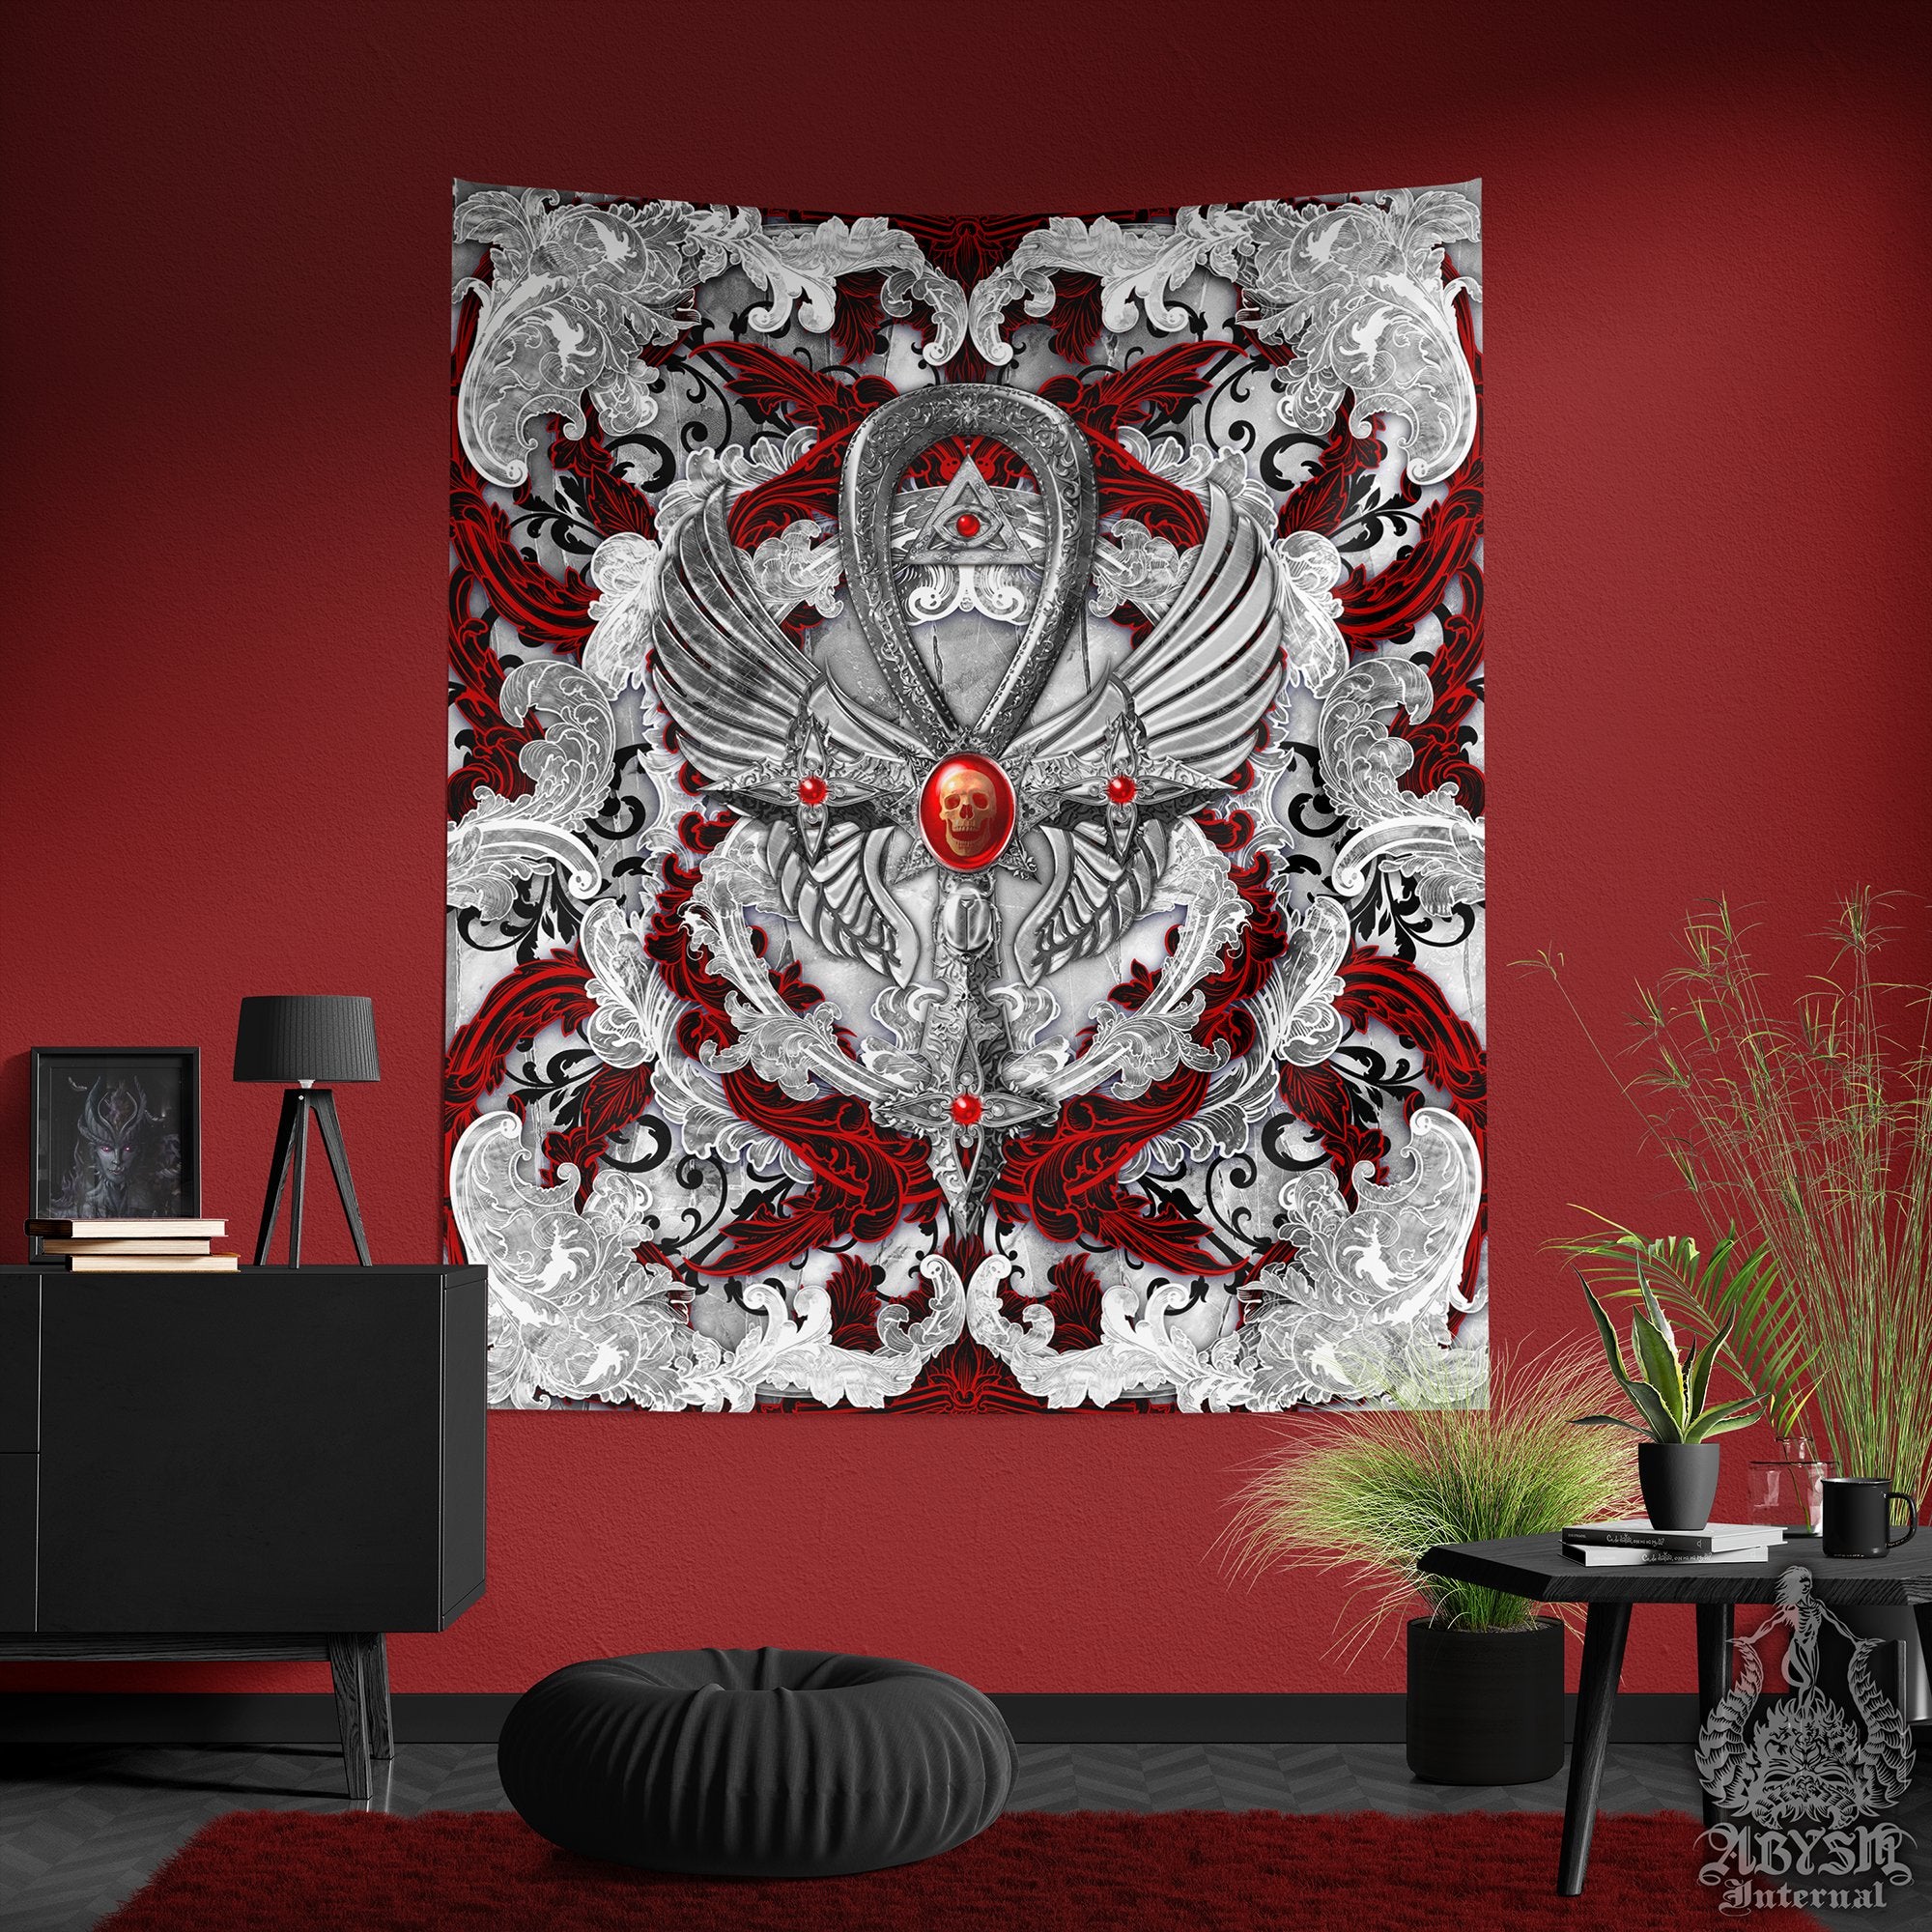 Bloody White Goth Tapestry, Gothic Ankh Wall Hanging, Cross, Occult Home Decor, Vertical Art Print - Red, Black, 3 Colors - Abysm Internal